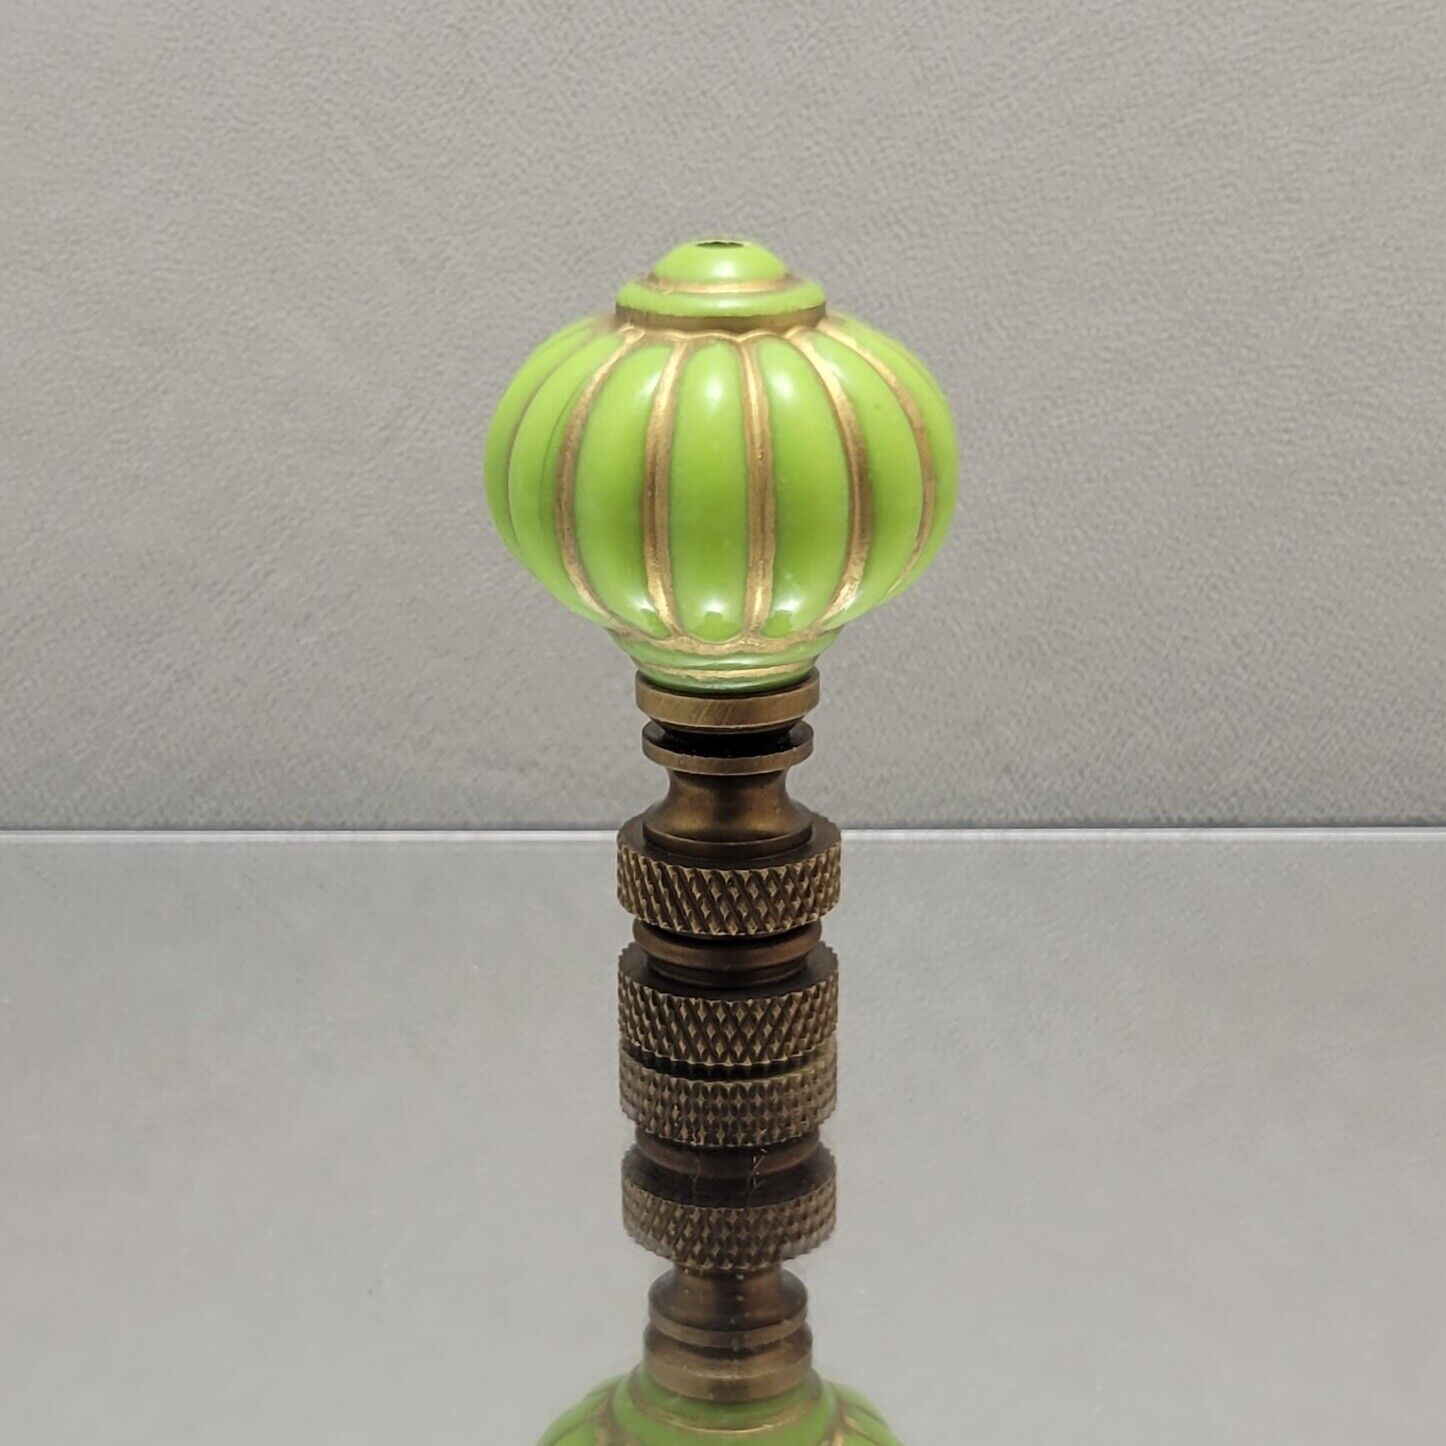 Lime Green/Gold, Acrylic, Antique Style Lamp Finial Polished/Antique Brass Base